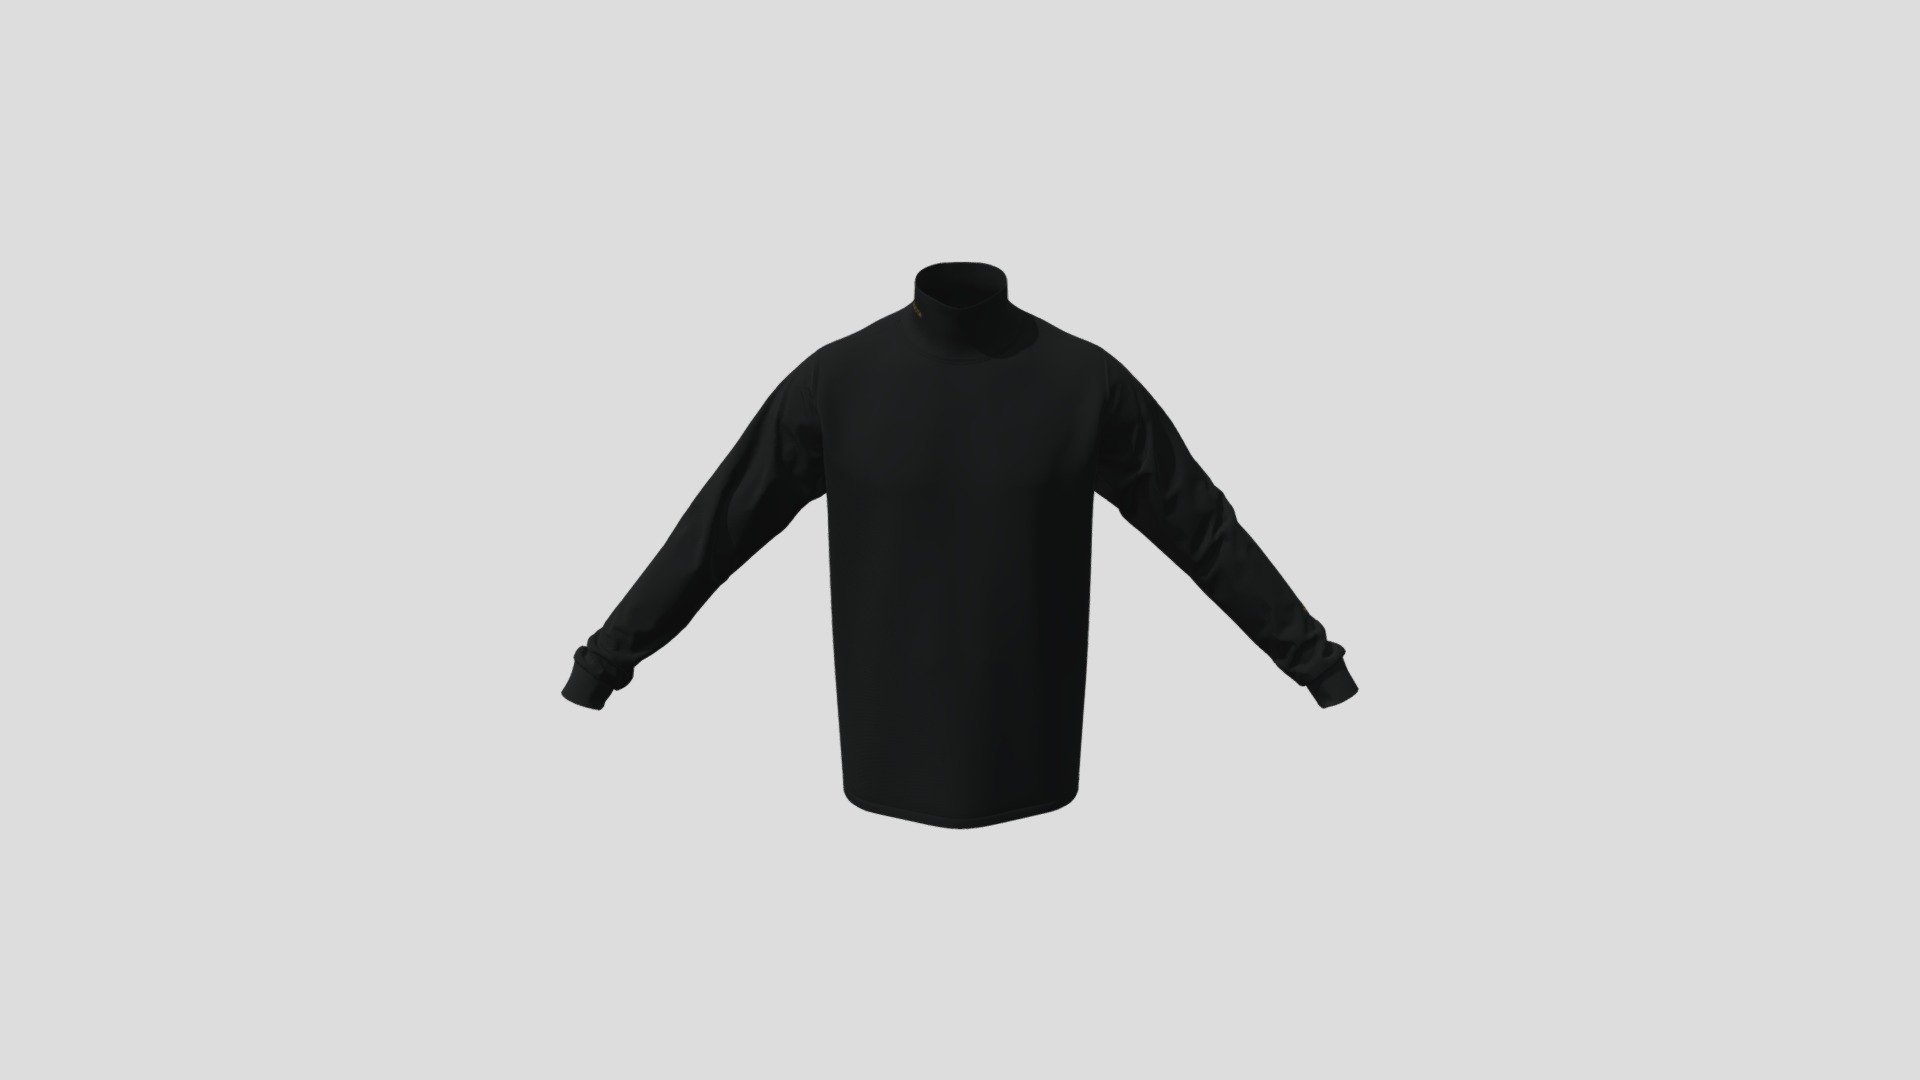 Nike x Drake NOCTA NRG AU Essential Mock Neck oversize with logo. 3D model for men. This item was created in Clo3D. 

Licence: You are free to use this model in any of your projects. Please remember to credit Virtual Rugs and subscribe for more upcoming 3d models coming soon - Nike x Drake NOCTA NRG AU Essential Mock Neck - 3D model by virtualrags 3d model